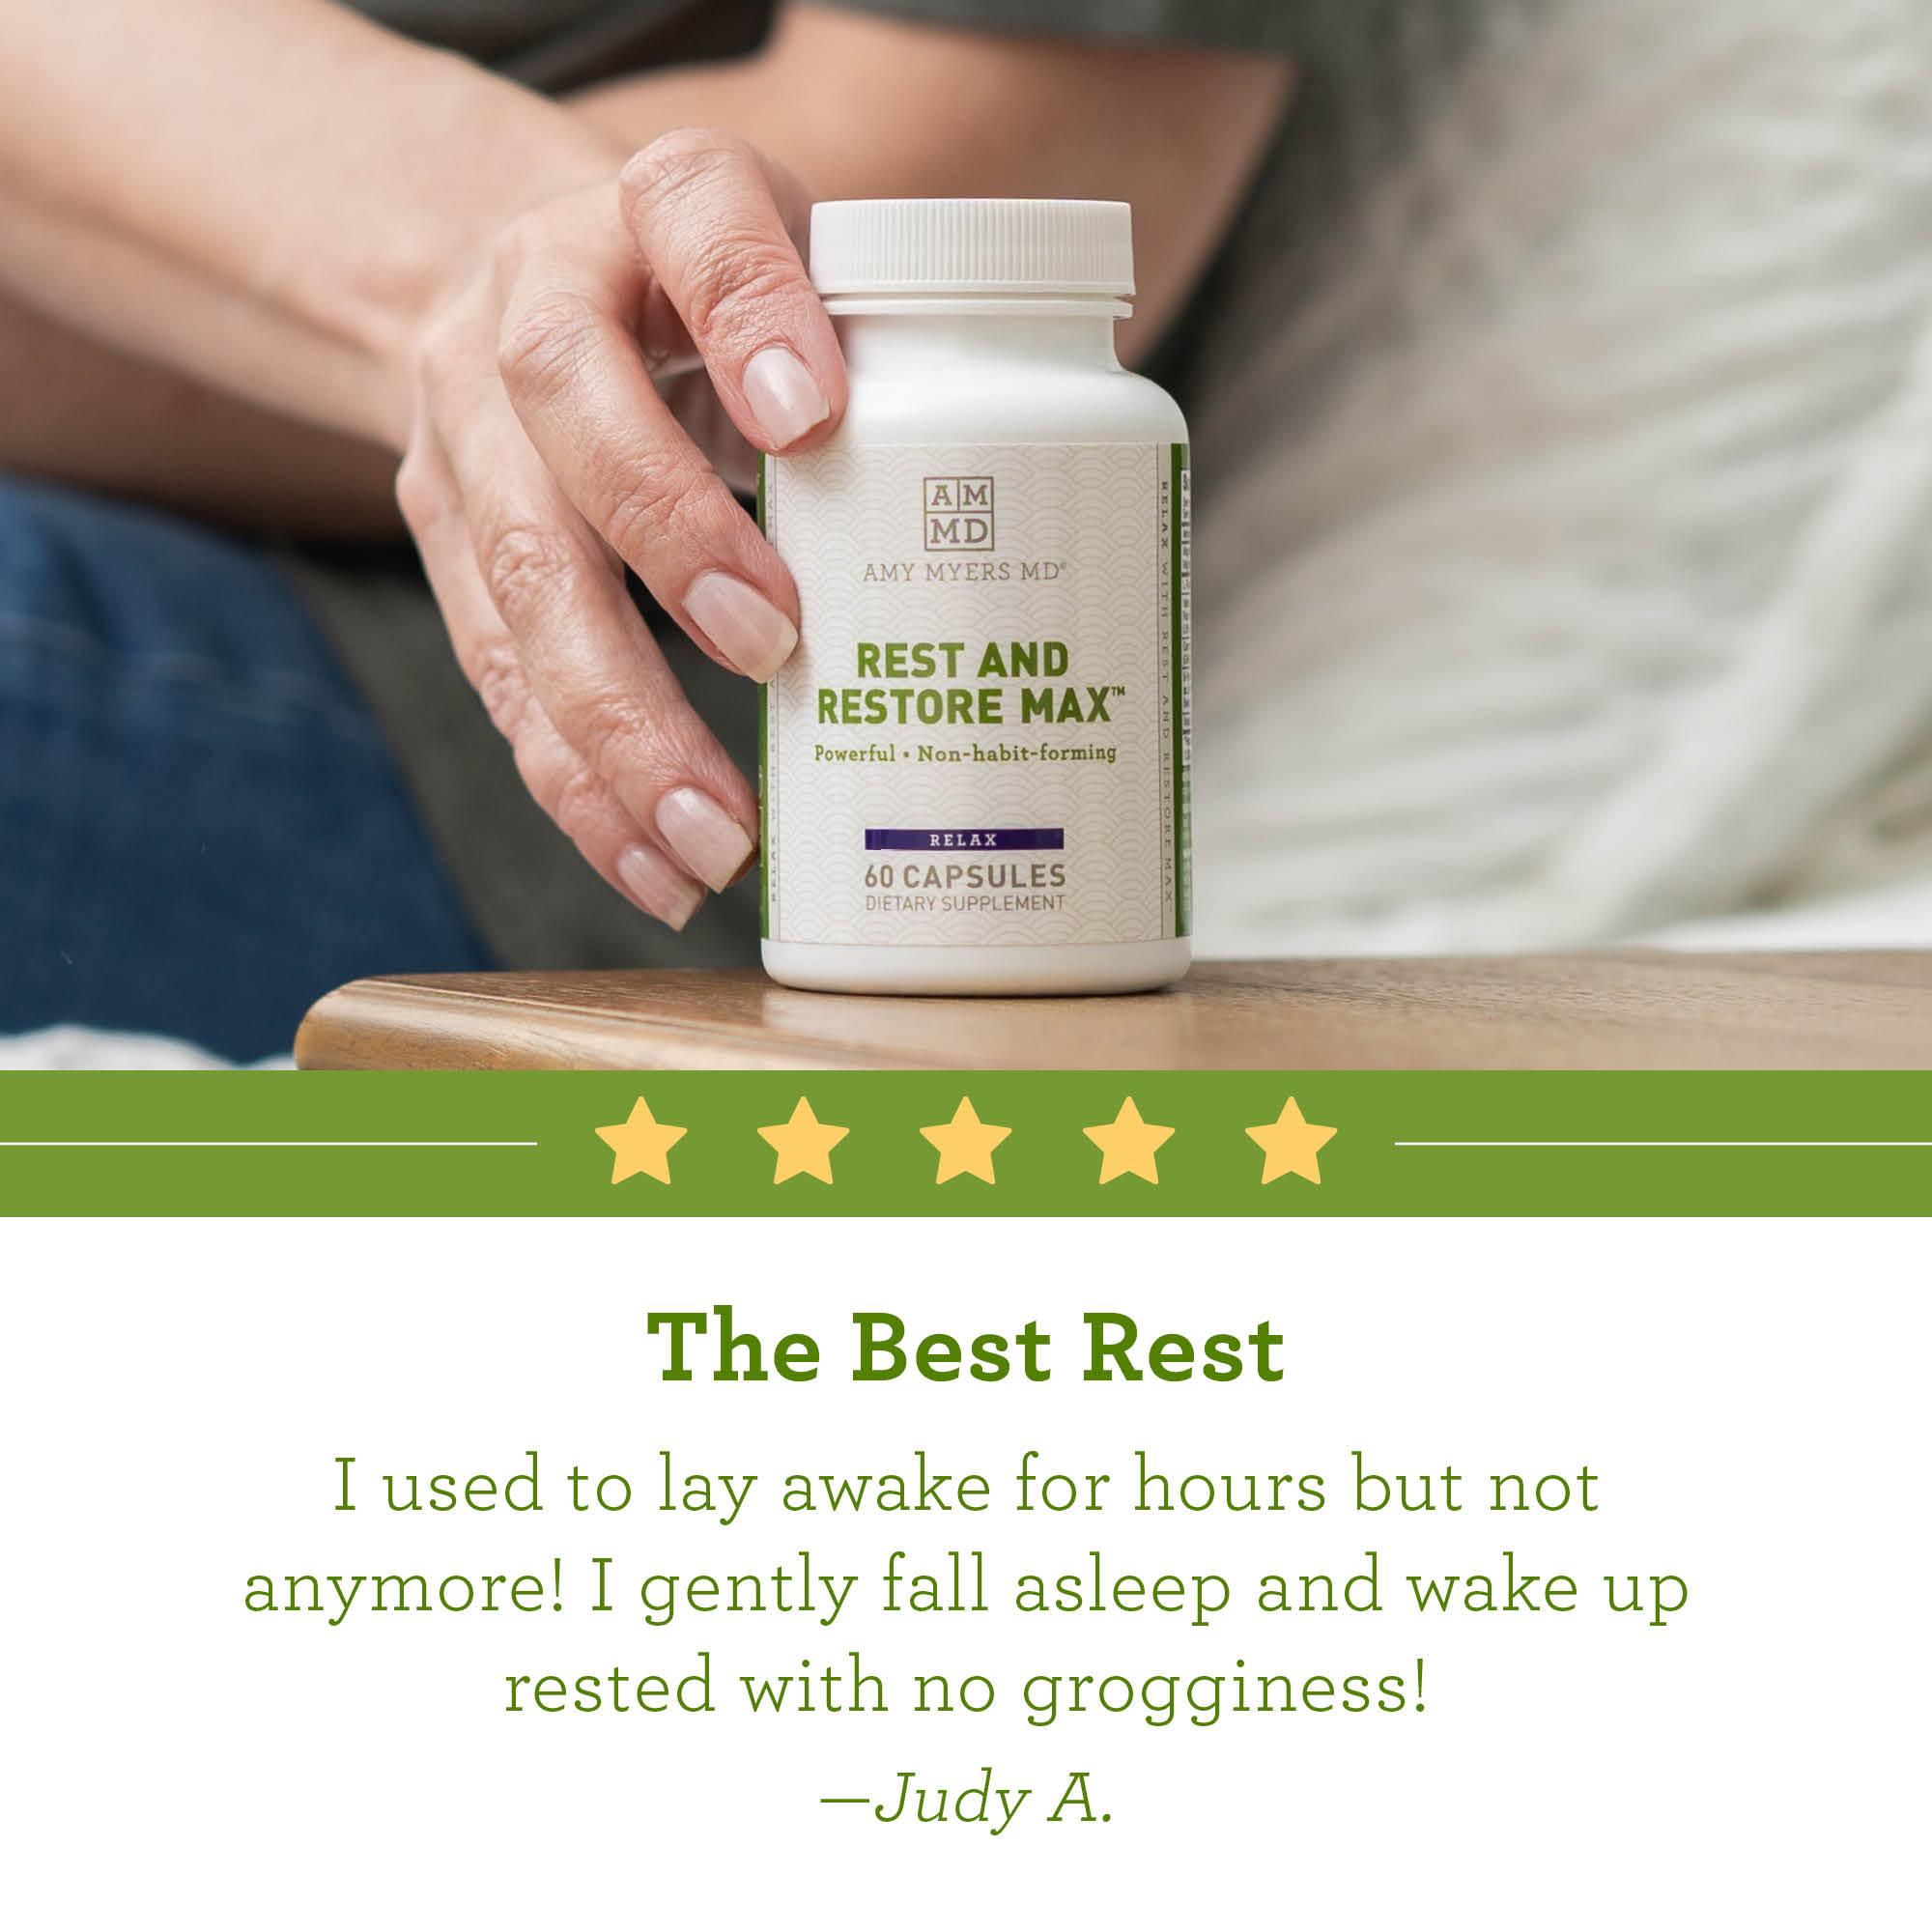 A woman holding a bottle of Rest and Restore™ Supplement on a nightstand with some reviews - Reviews Image - Amy Myers MD®